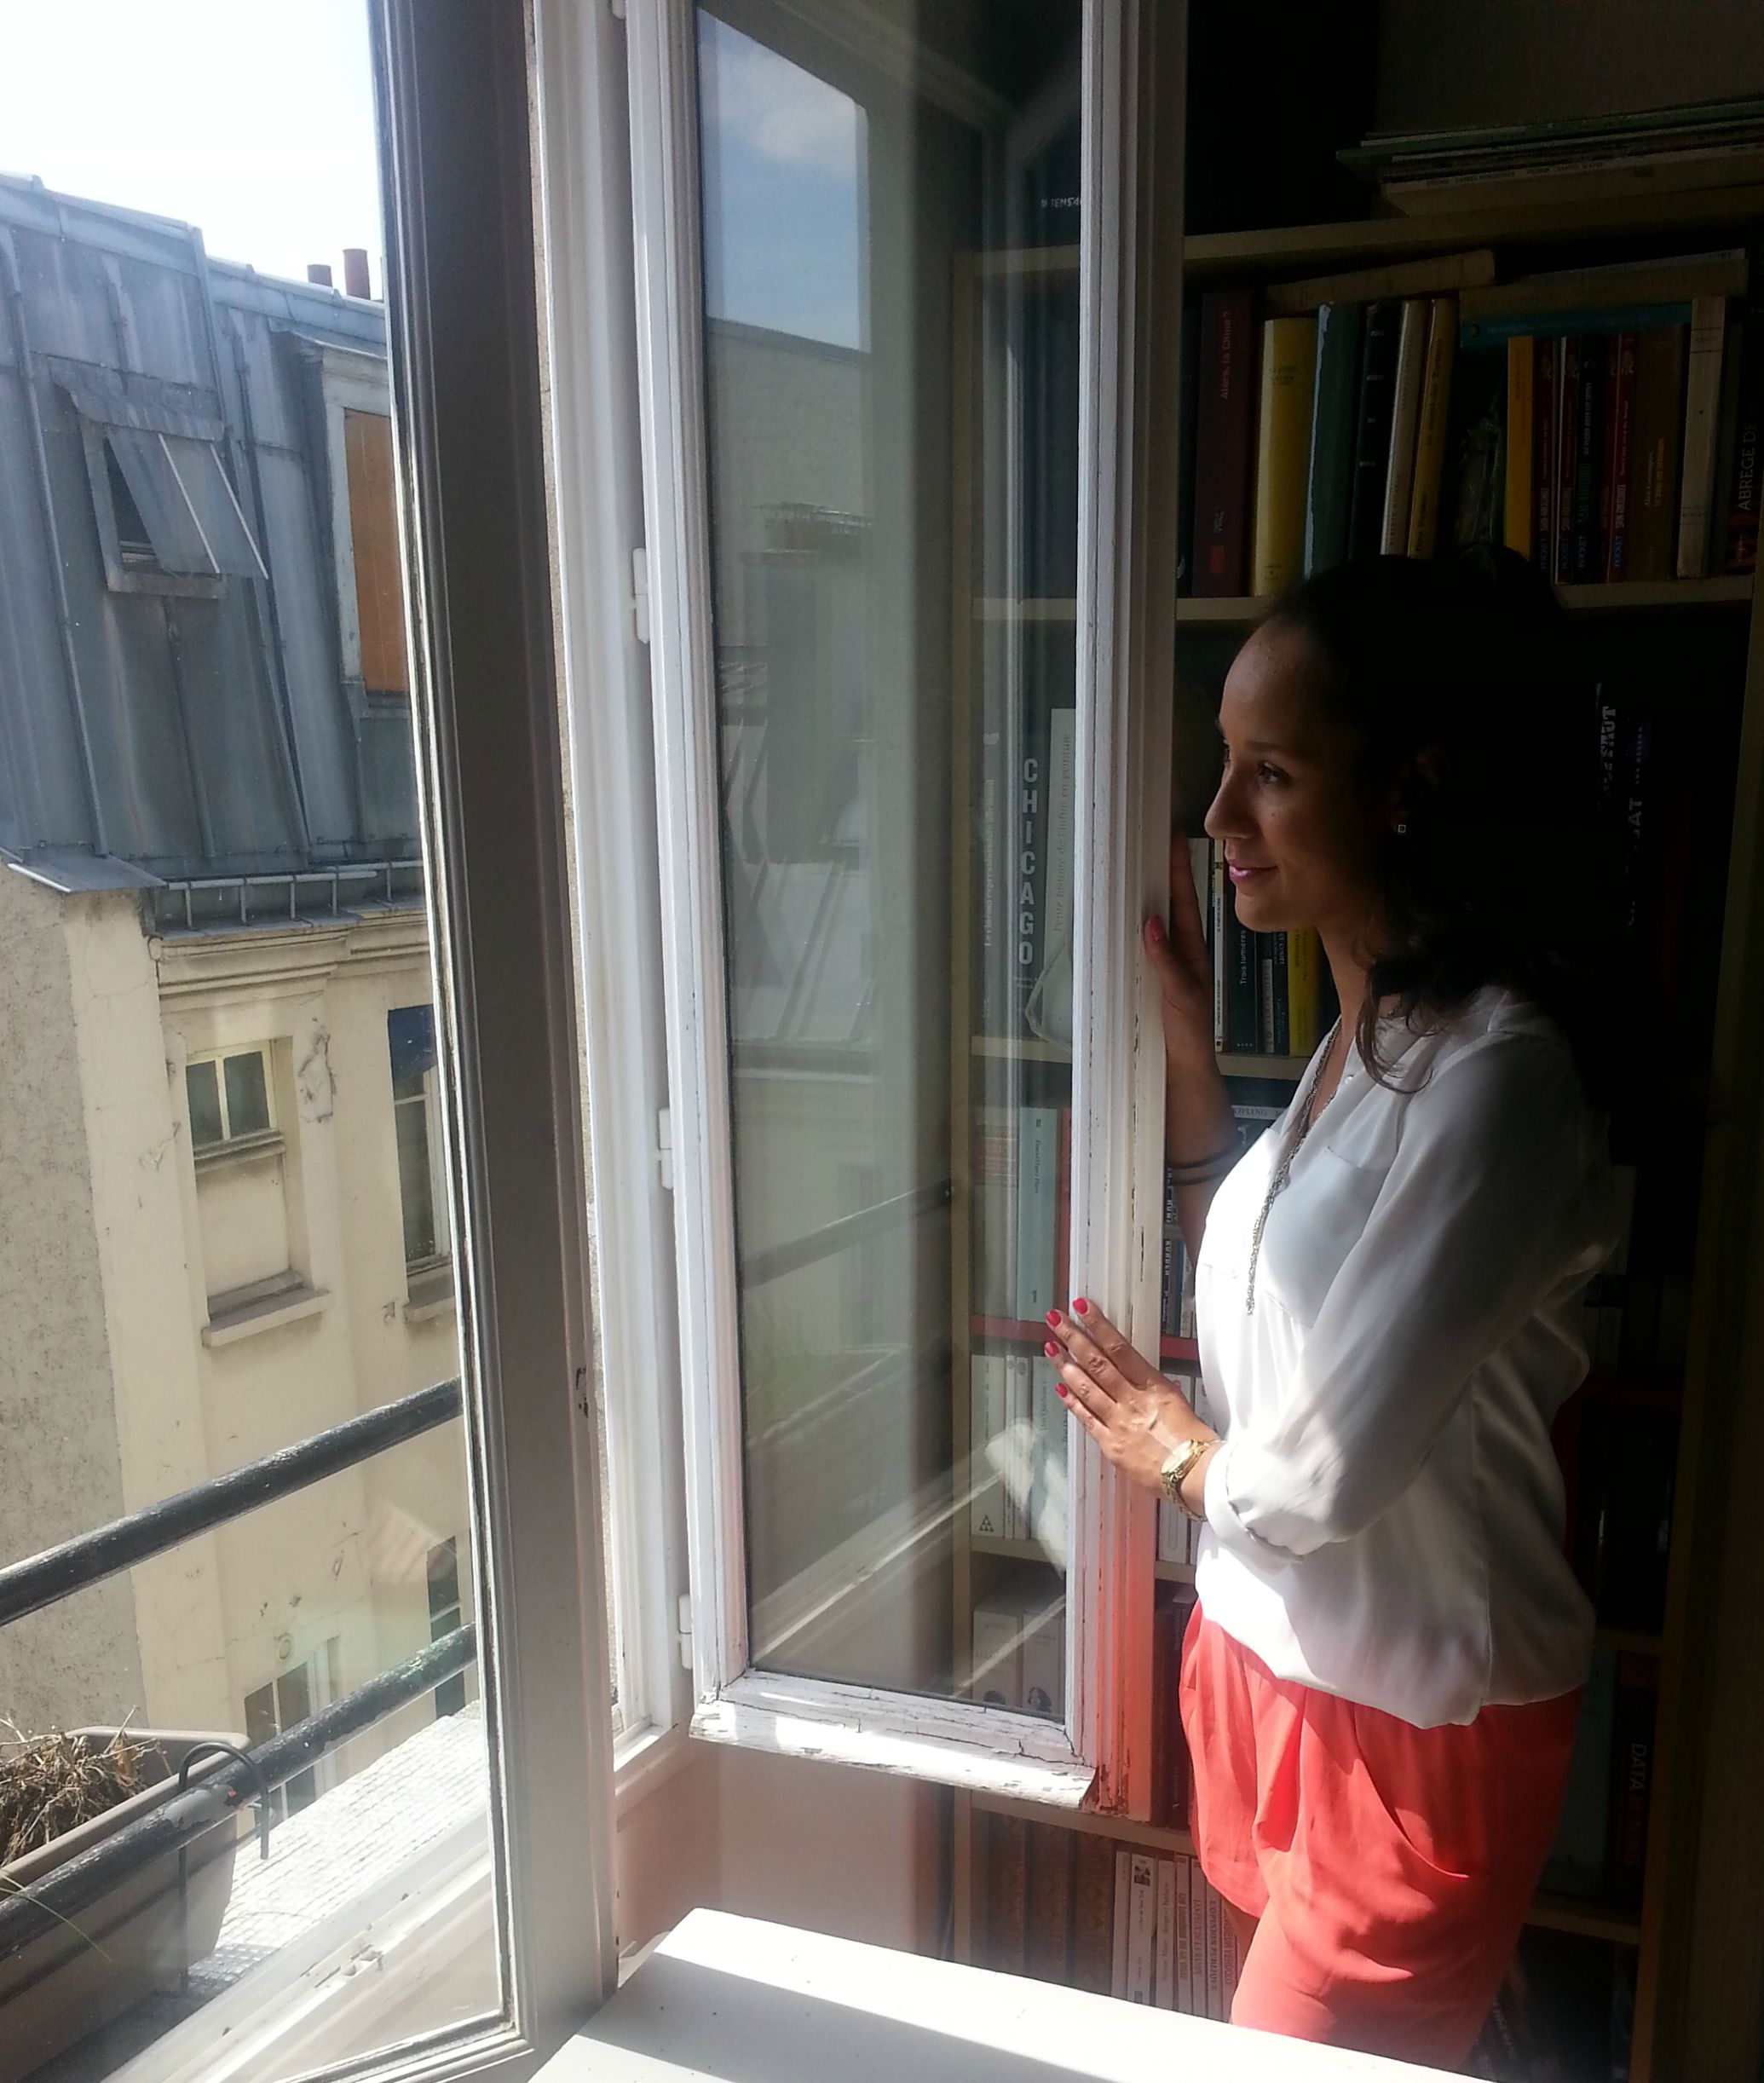 Looking out the apartment window in Paris France